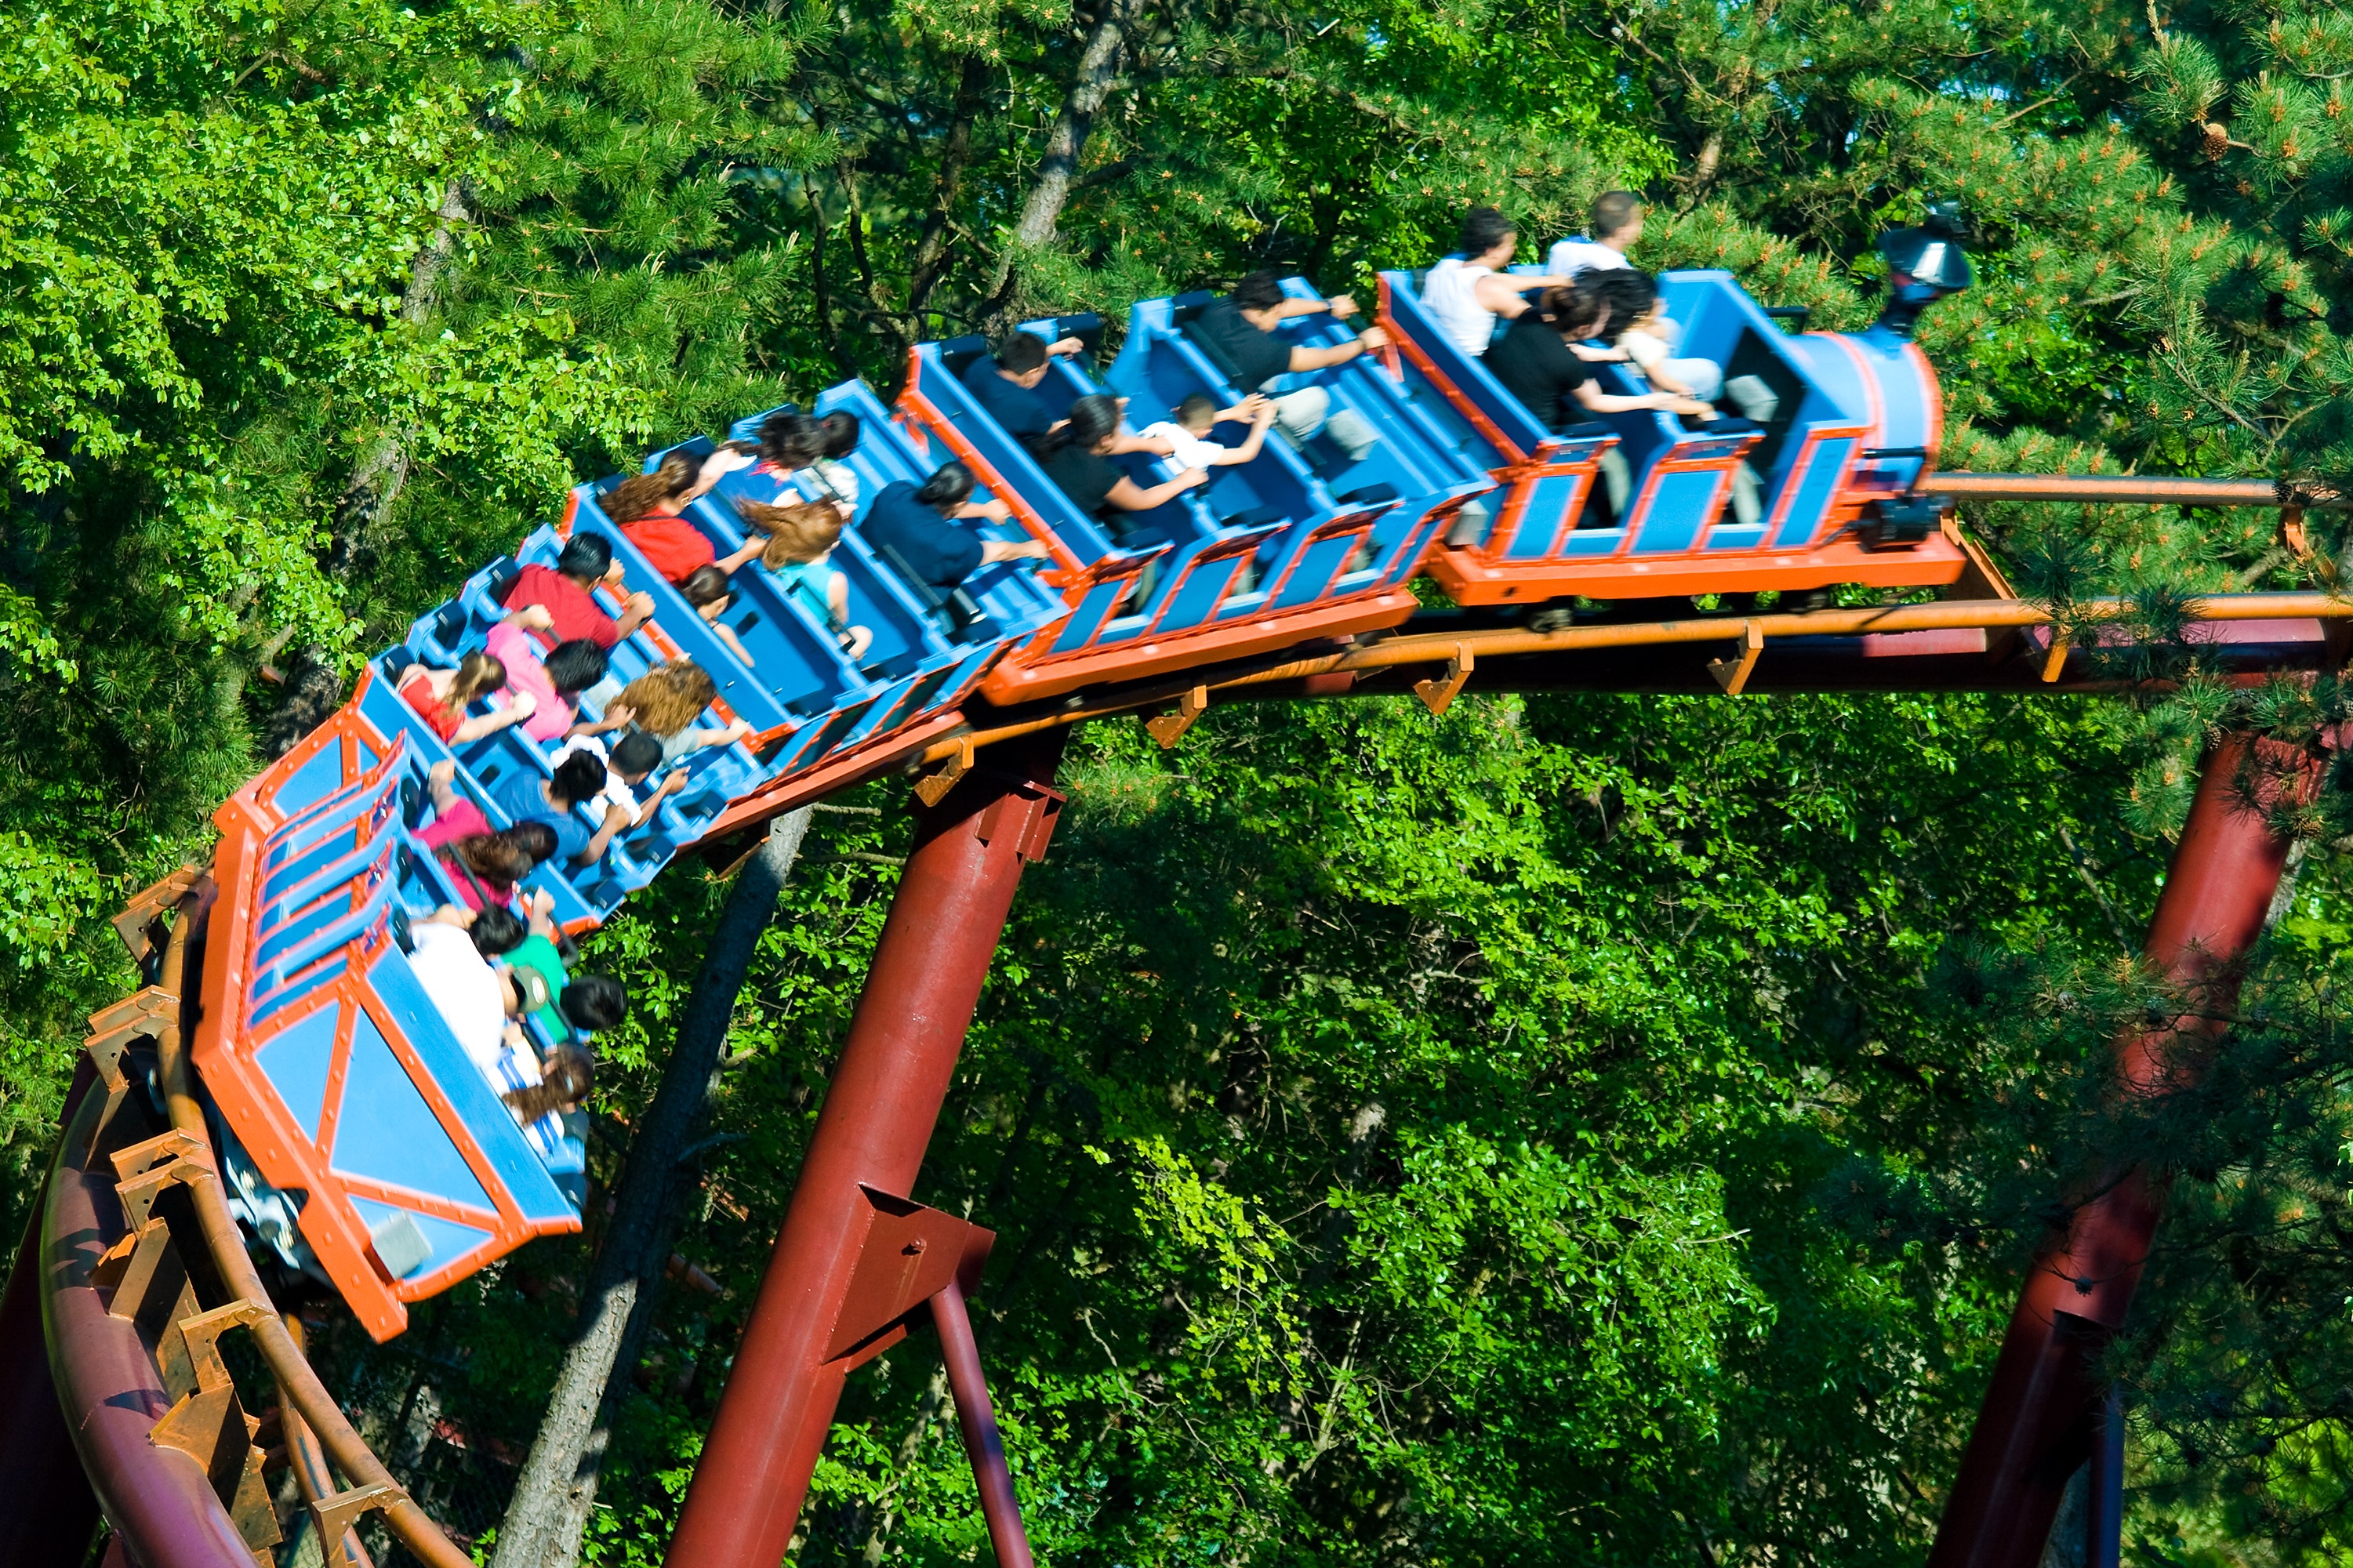 Is this the most dangerous roller coaster in America?